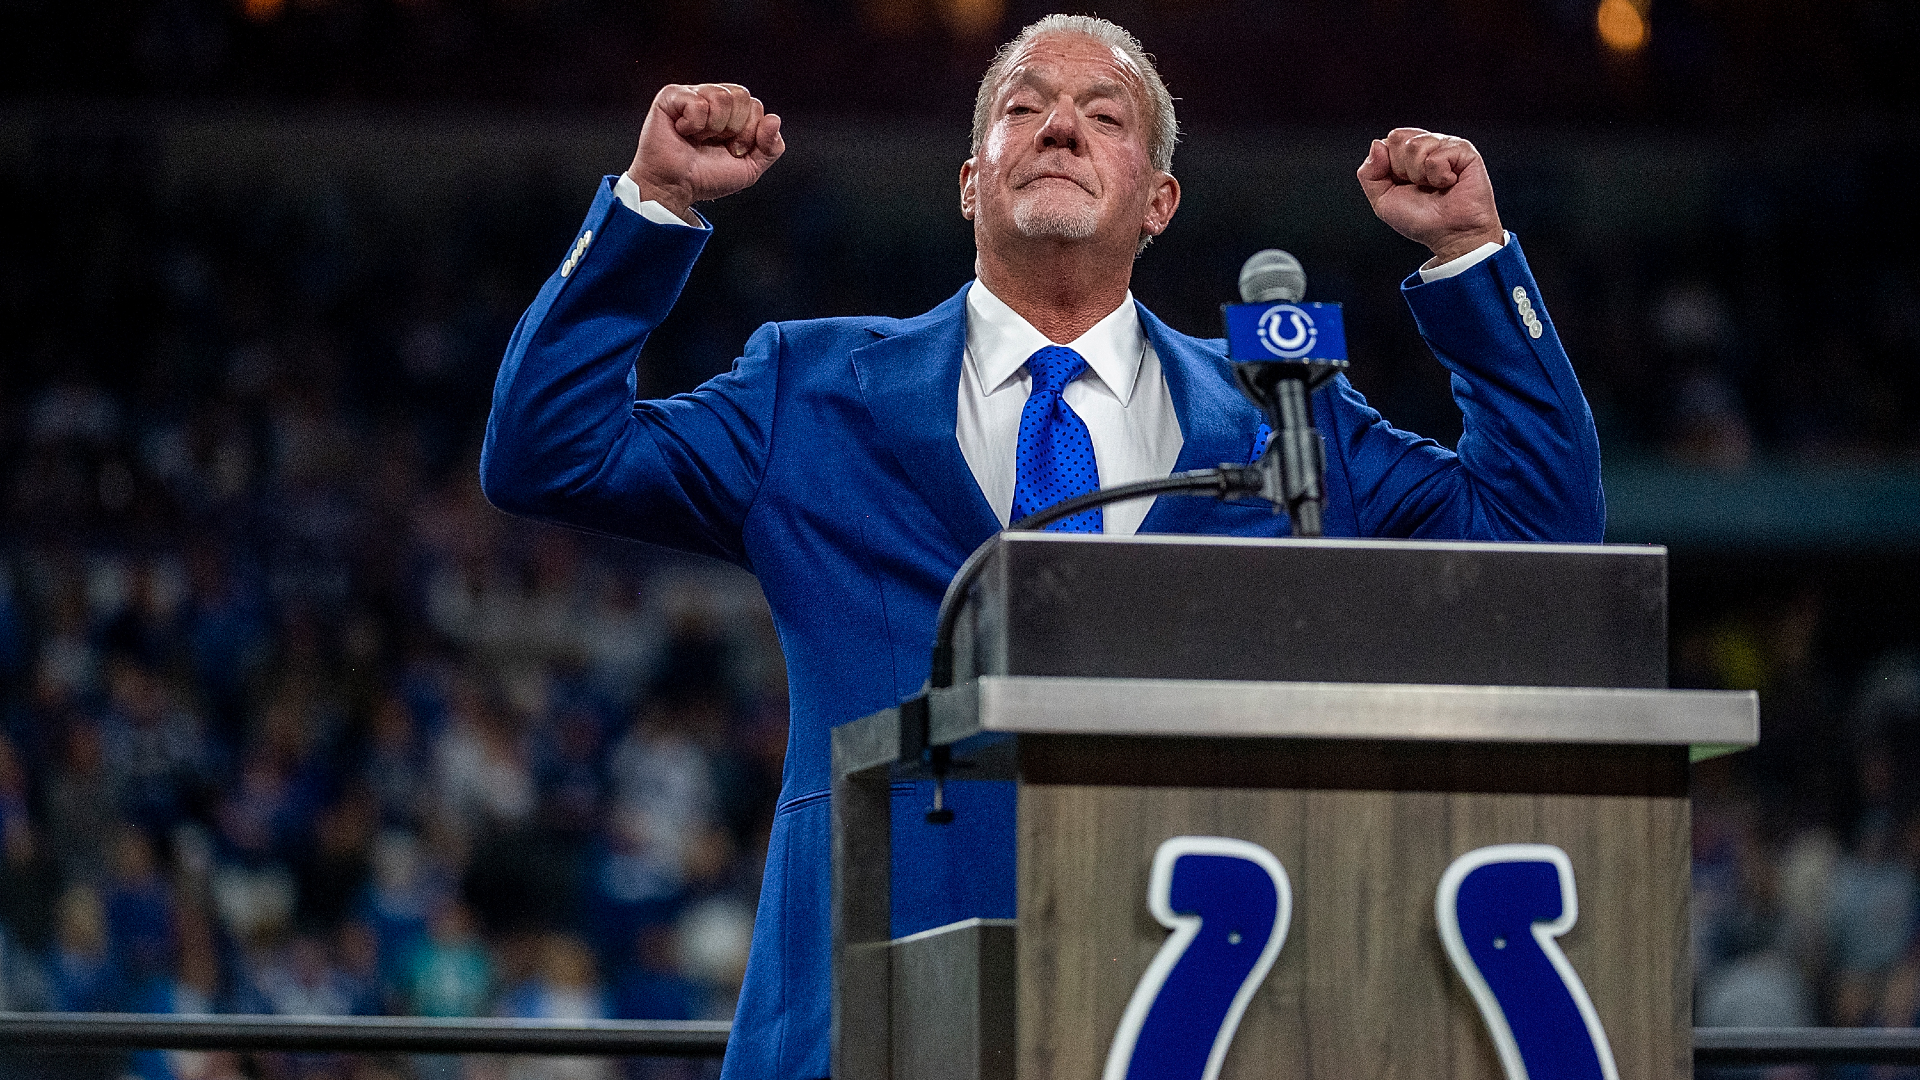 Jim Irsay bemoans the Colts' regular season collapse, determined to win - but is it a simple fix?